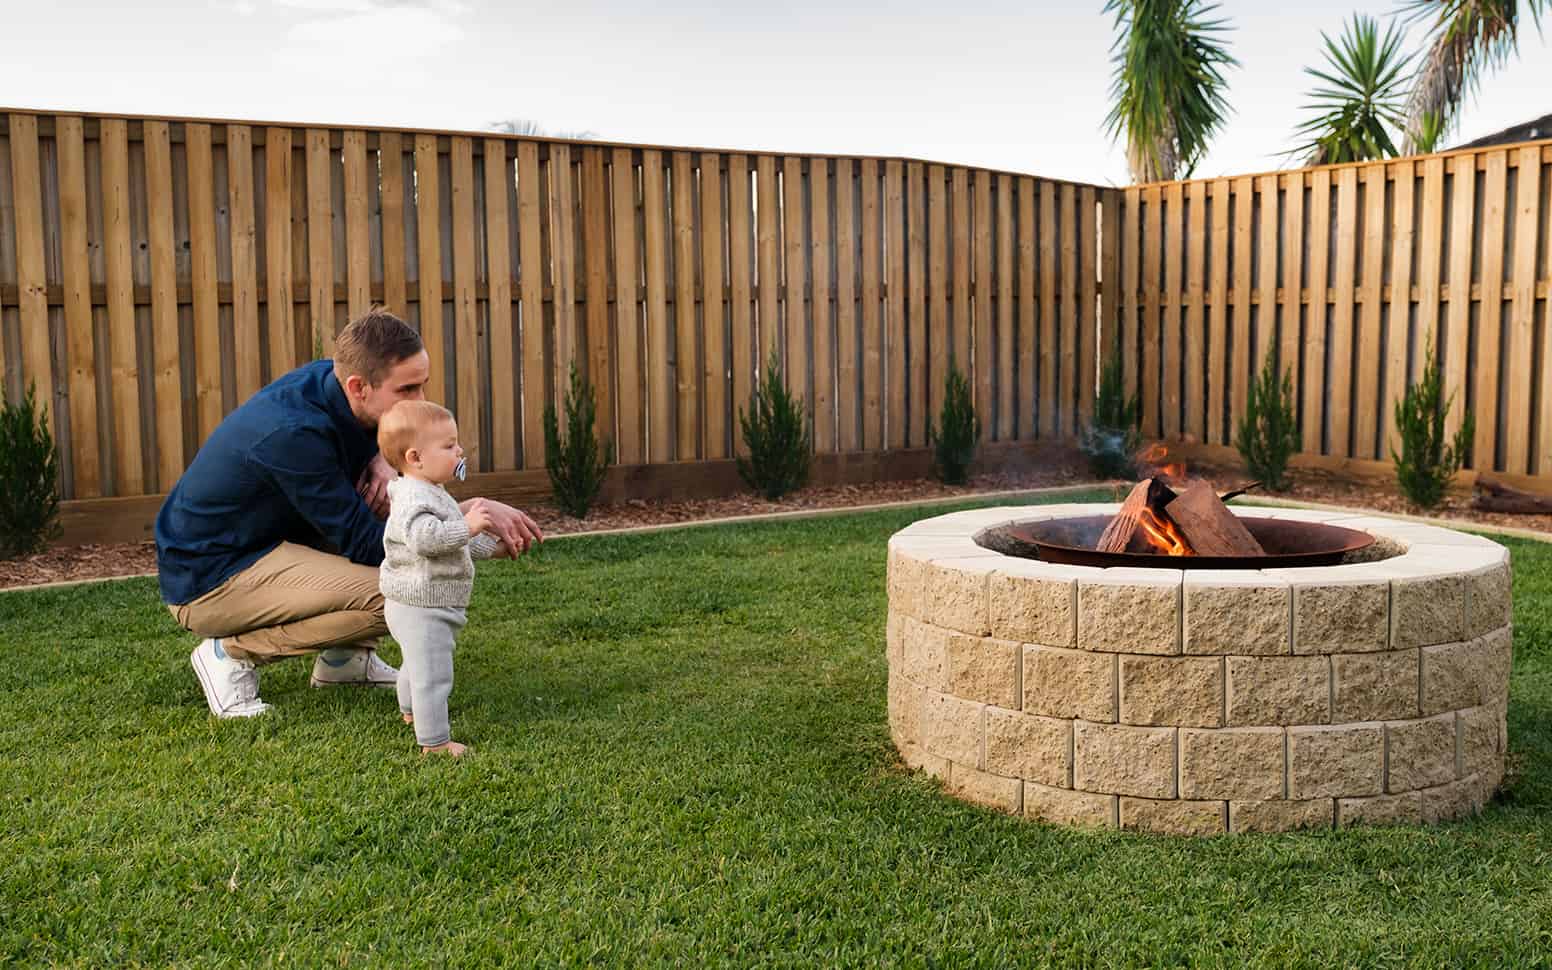 a person and baby by a fire pit